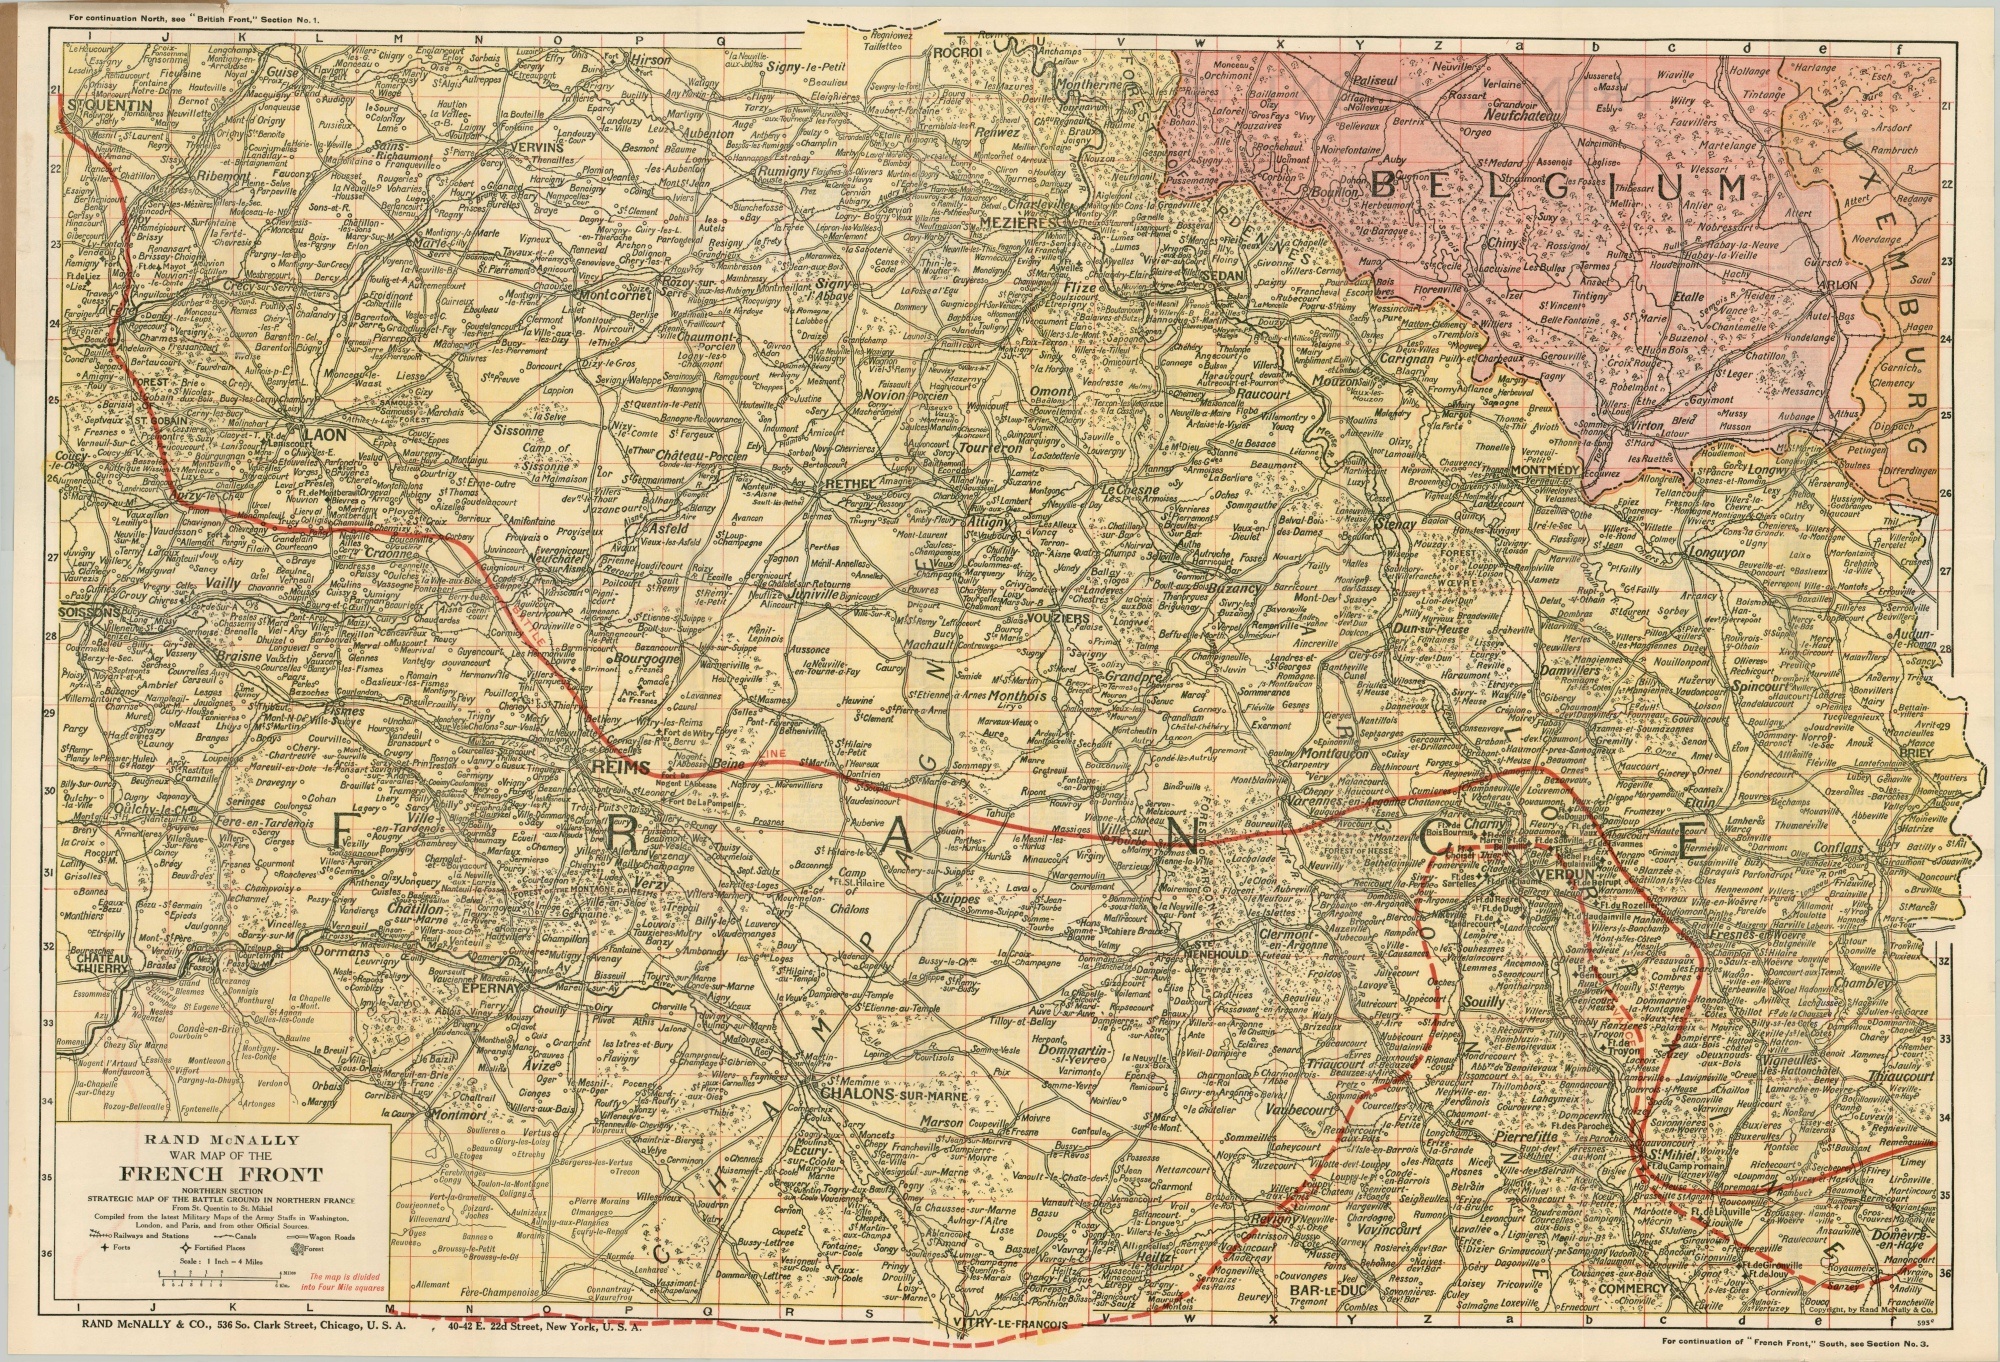 War Map of the French Front | Curtis Wright Maps